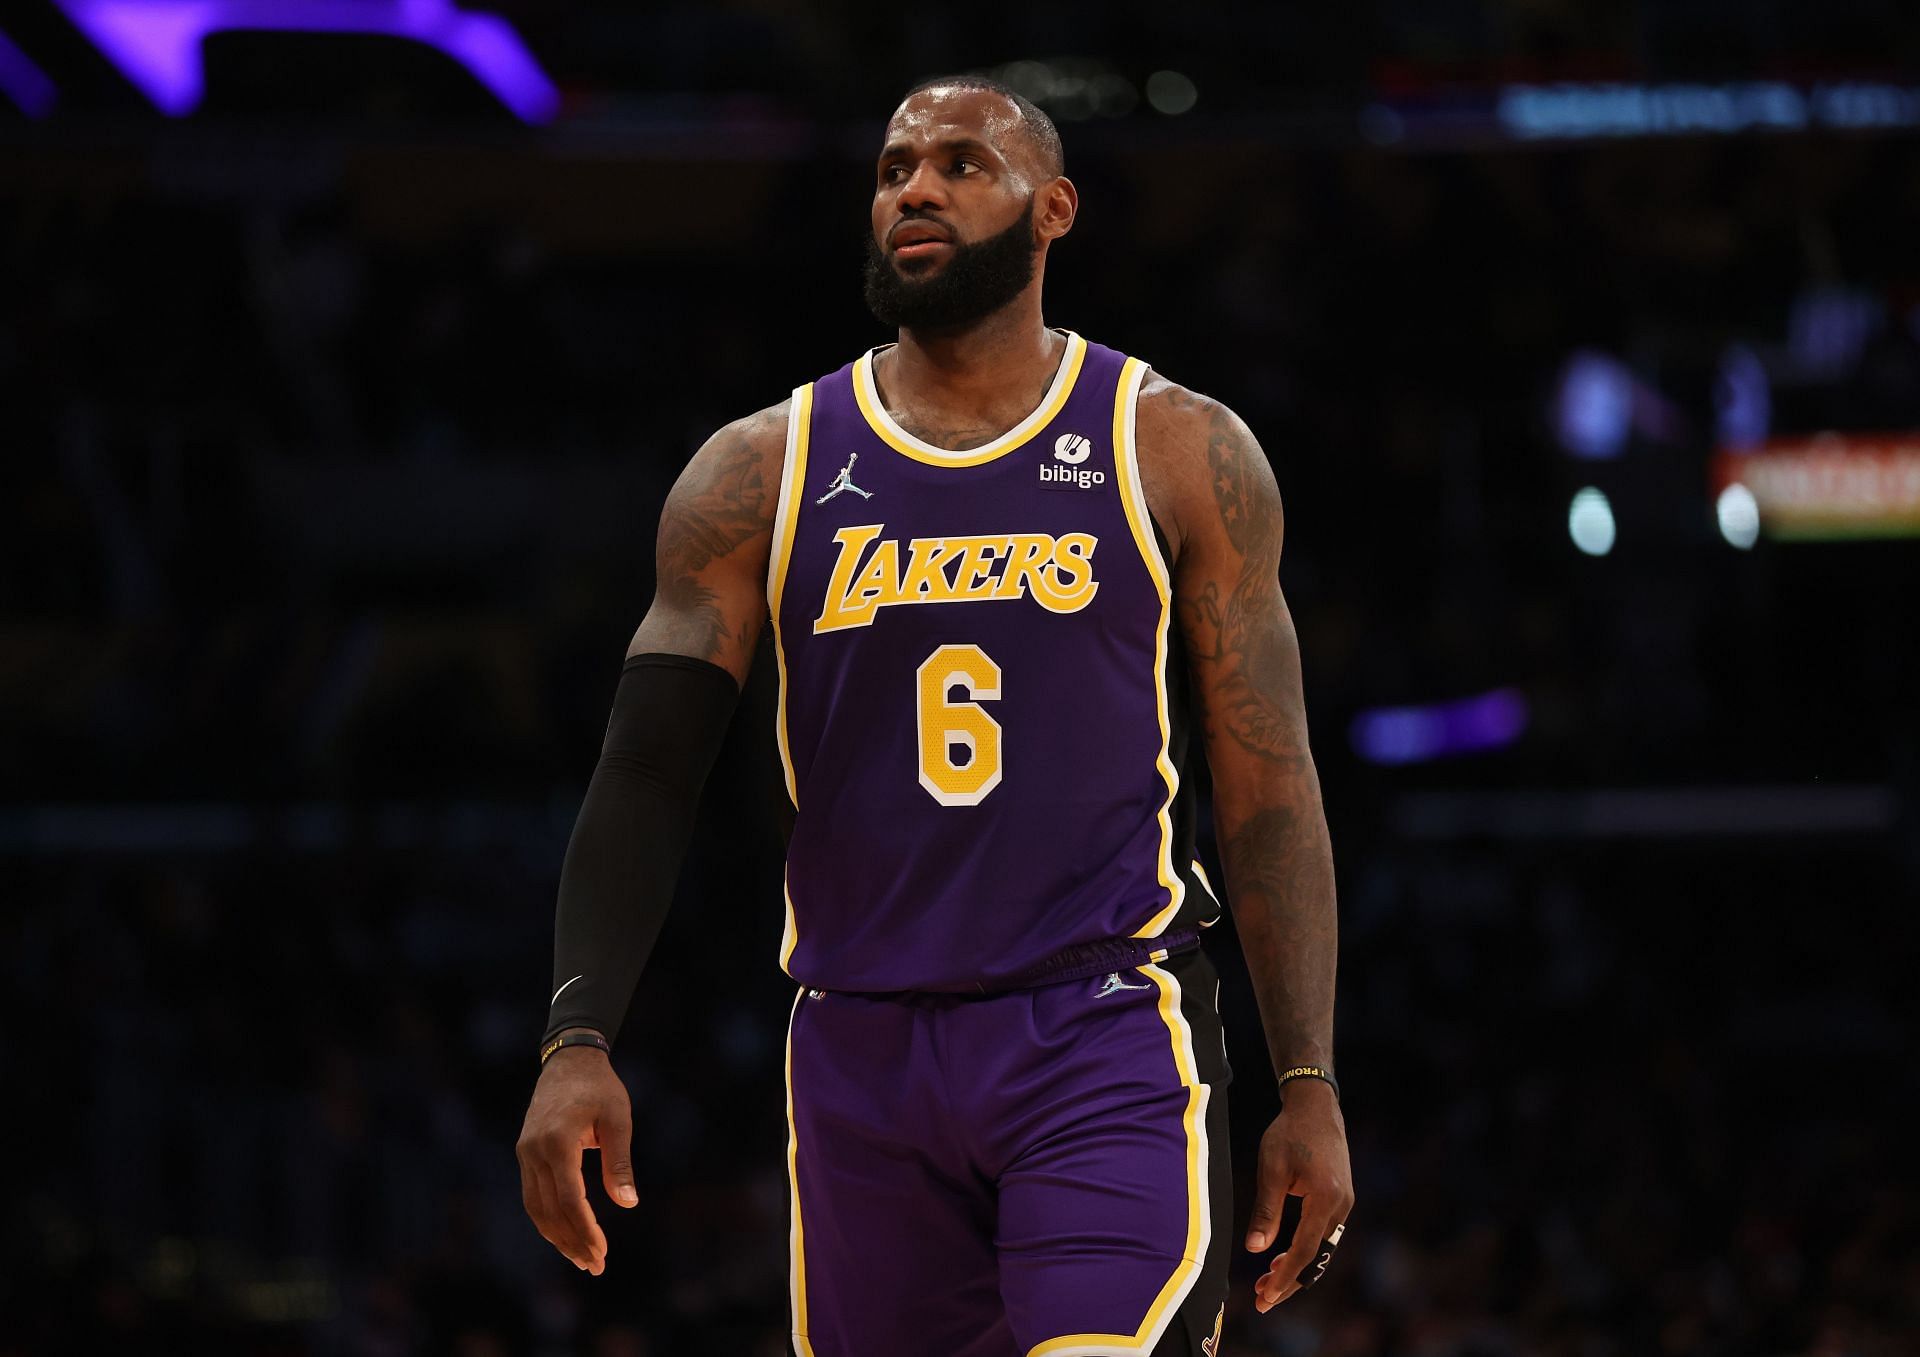 Los Angeles Lakers star LeBron James is expected to miss at least one week